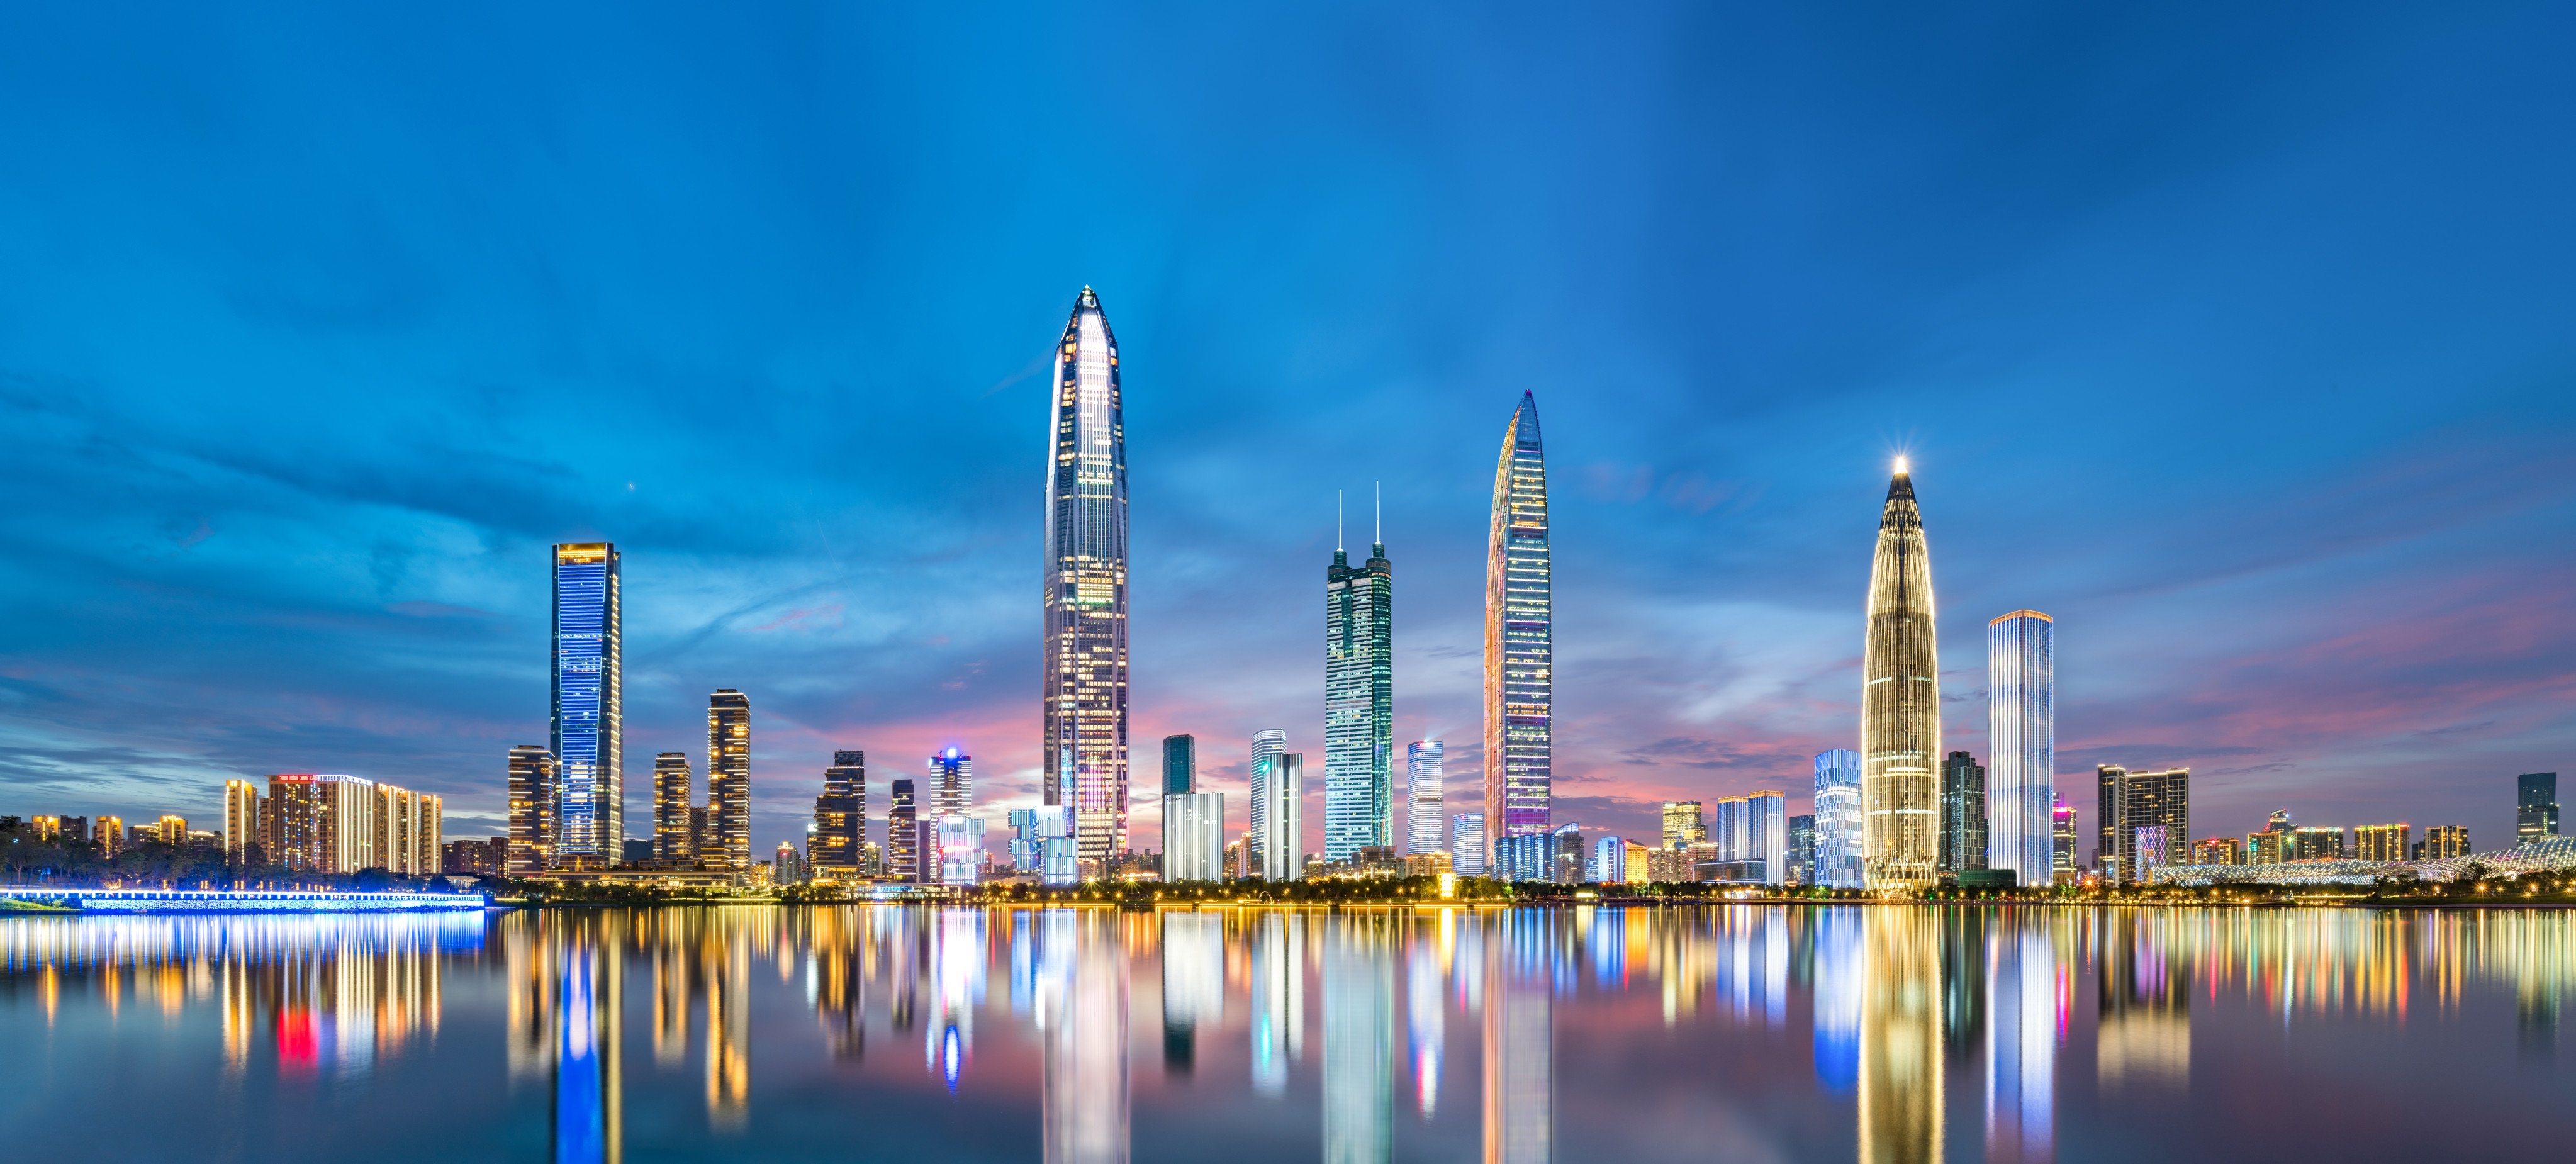 The Shenzhen municipal government’s new funding initiative for technology firms marks the city’s latest effort to help the domestic tech sector overcome stifling US sanctions. Photo: Shutterstock